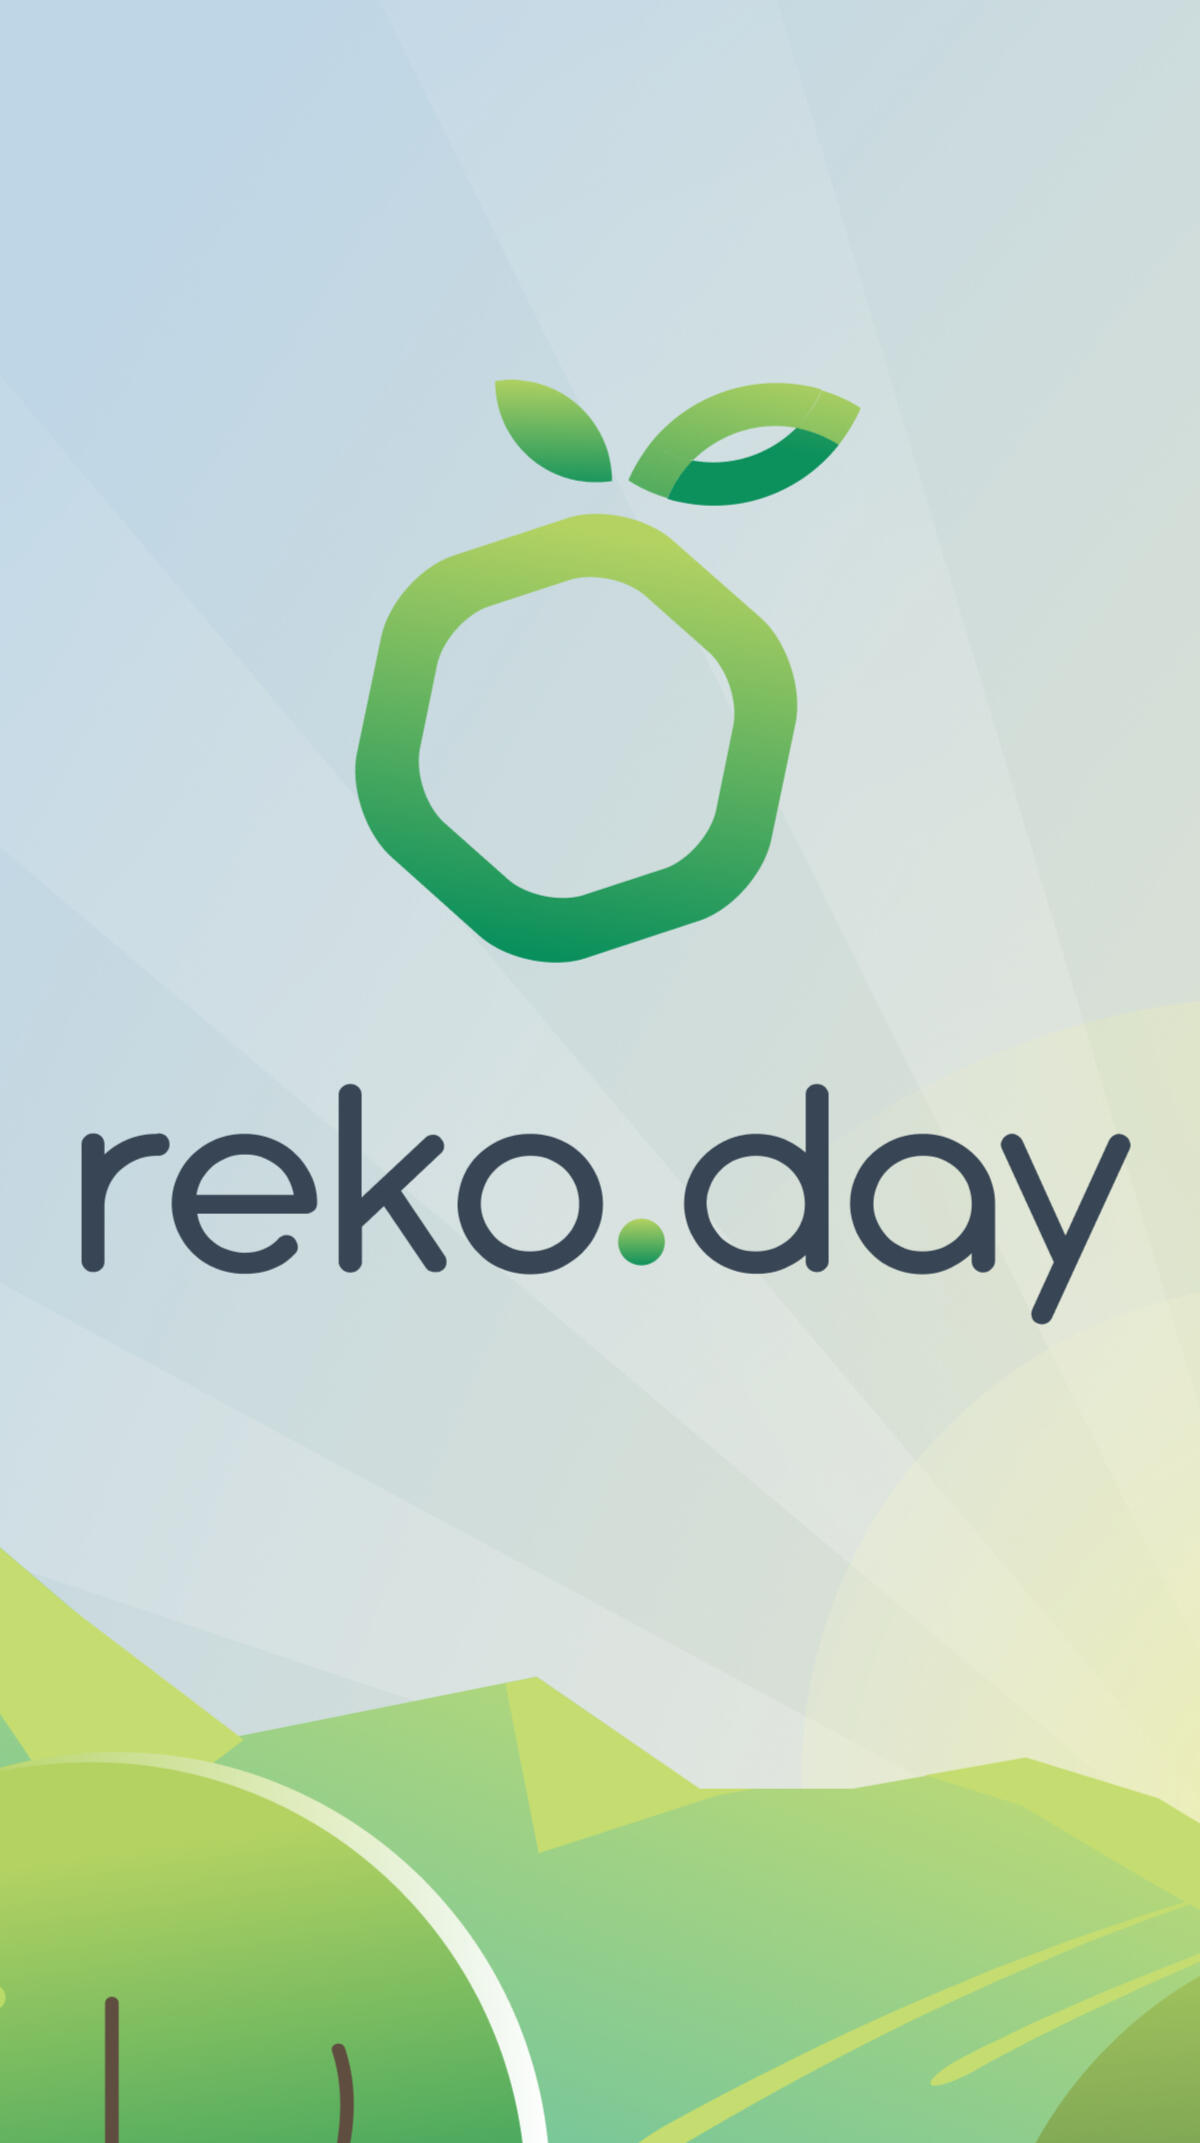 The reko day splash screen featuring the logo in the sky over green hills backlit by the sun.